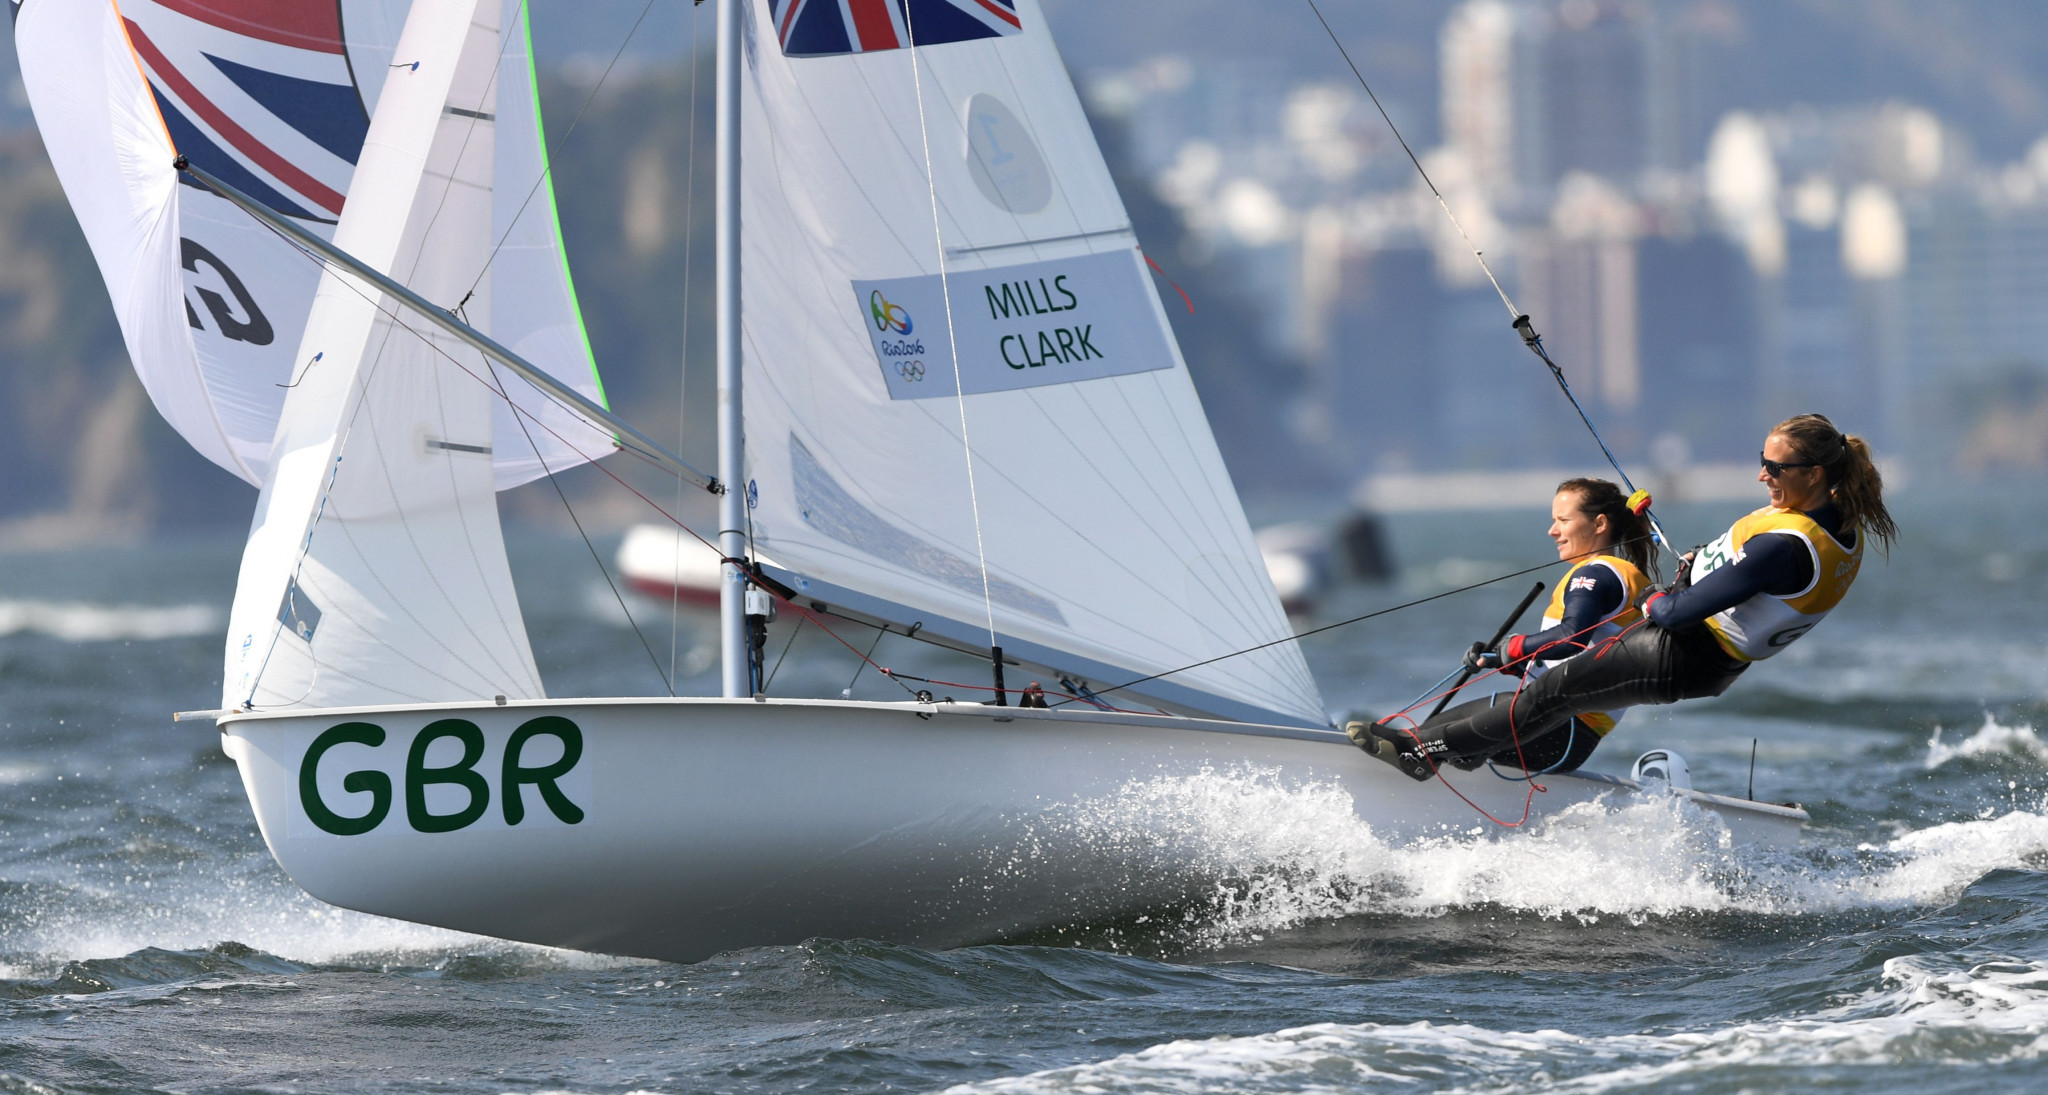 British Olympic sailing champion Hannah Mills was among those in attendance at the event ©Getty Images